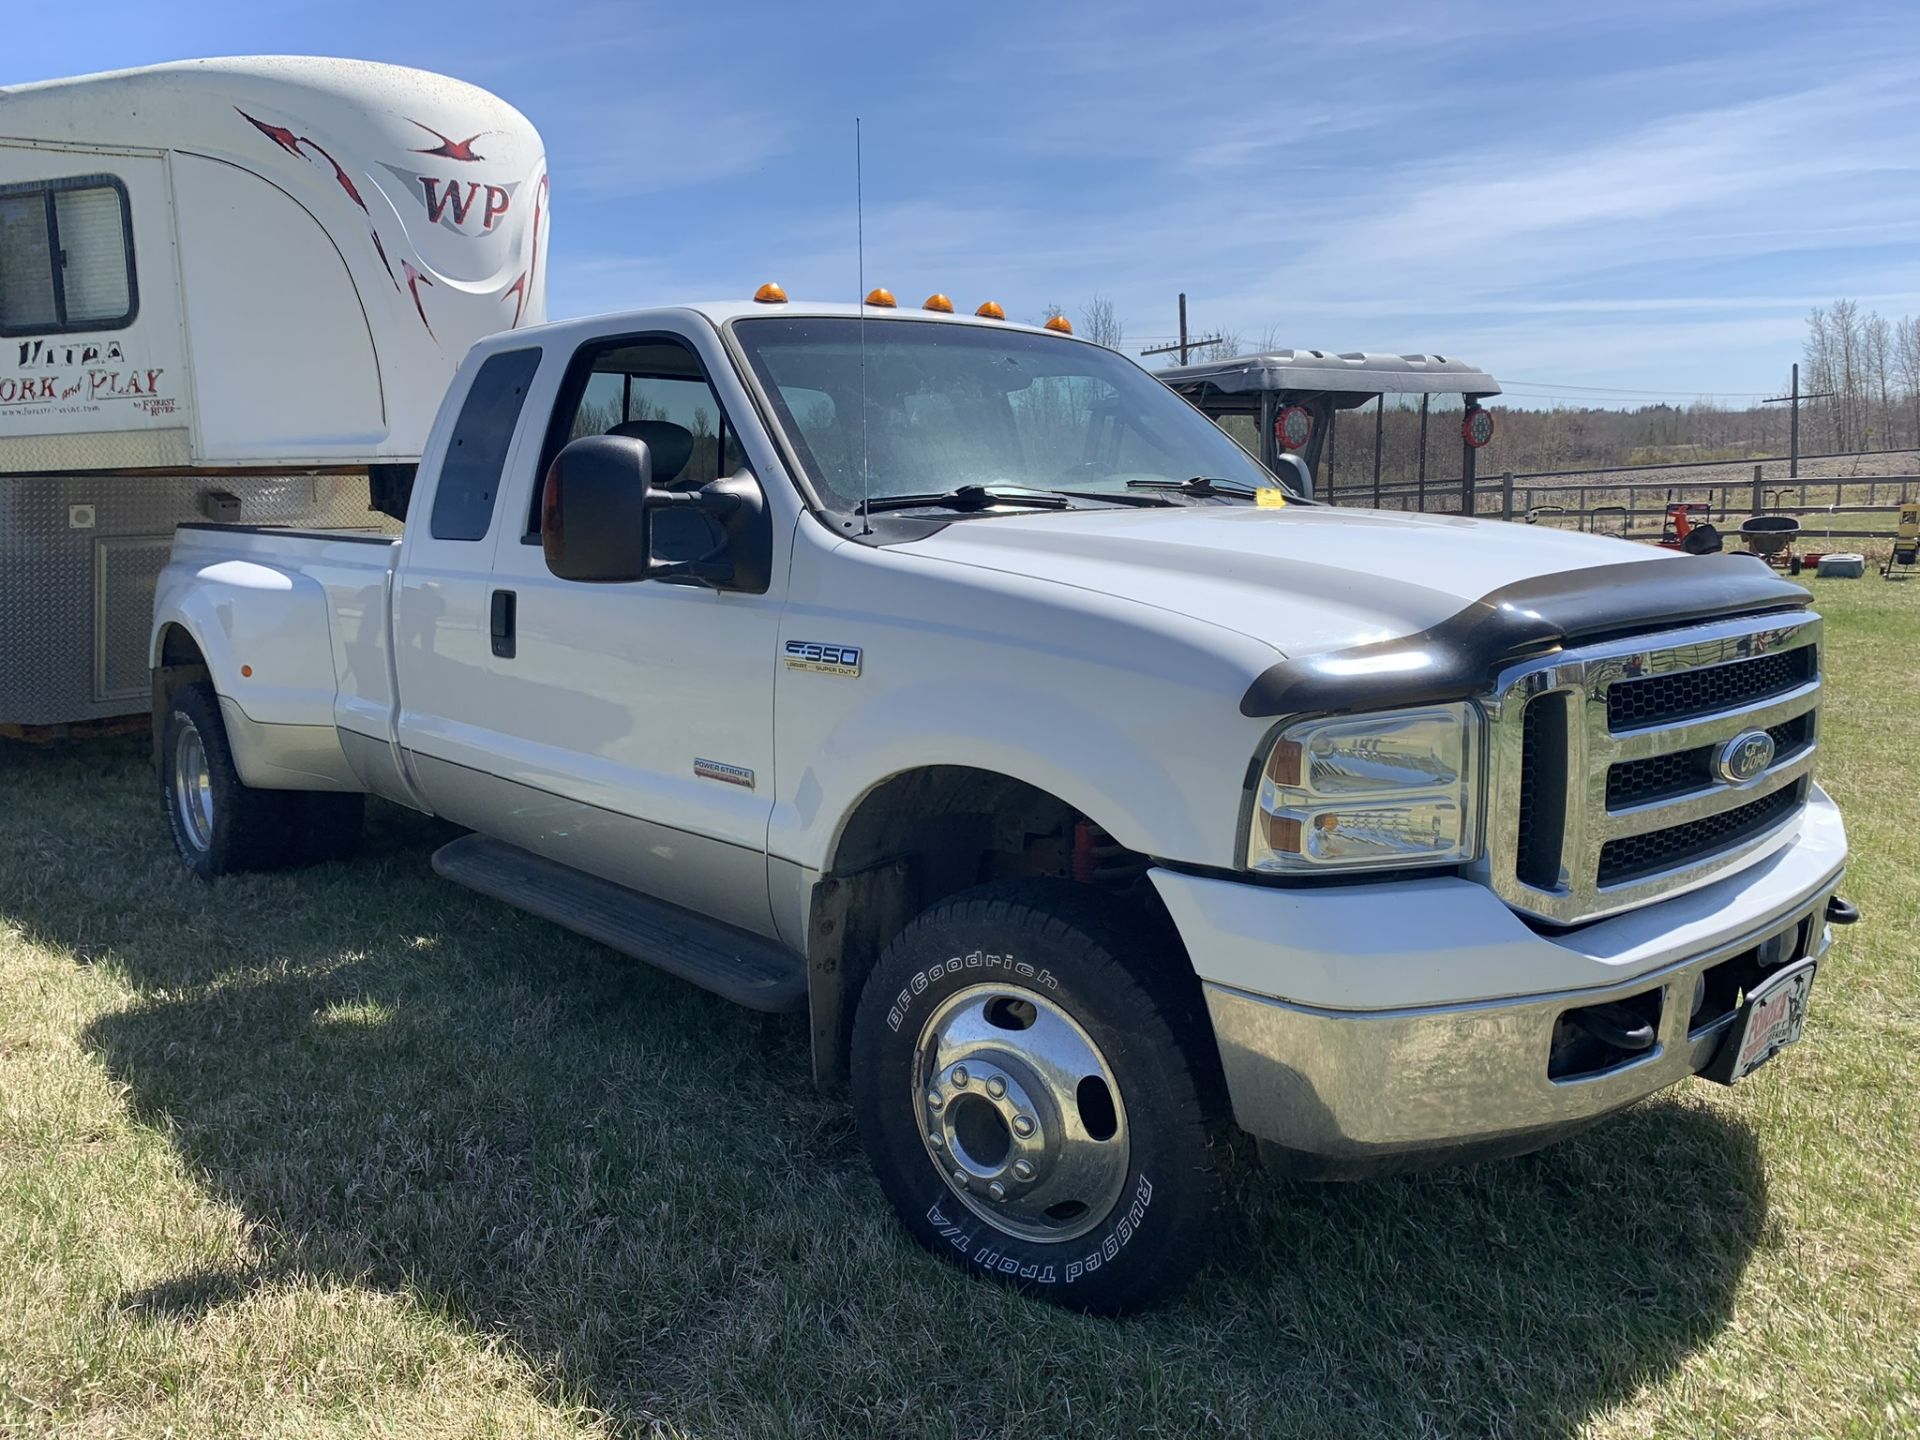 2005 F350 LARIAT SUPER DUTY SUPER CAB-4 DR. 4X4 DUALLY LONG BOX TRUCK W/6L DIESEL ENG., 134,810 - Image 2 of 14